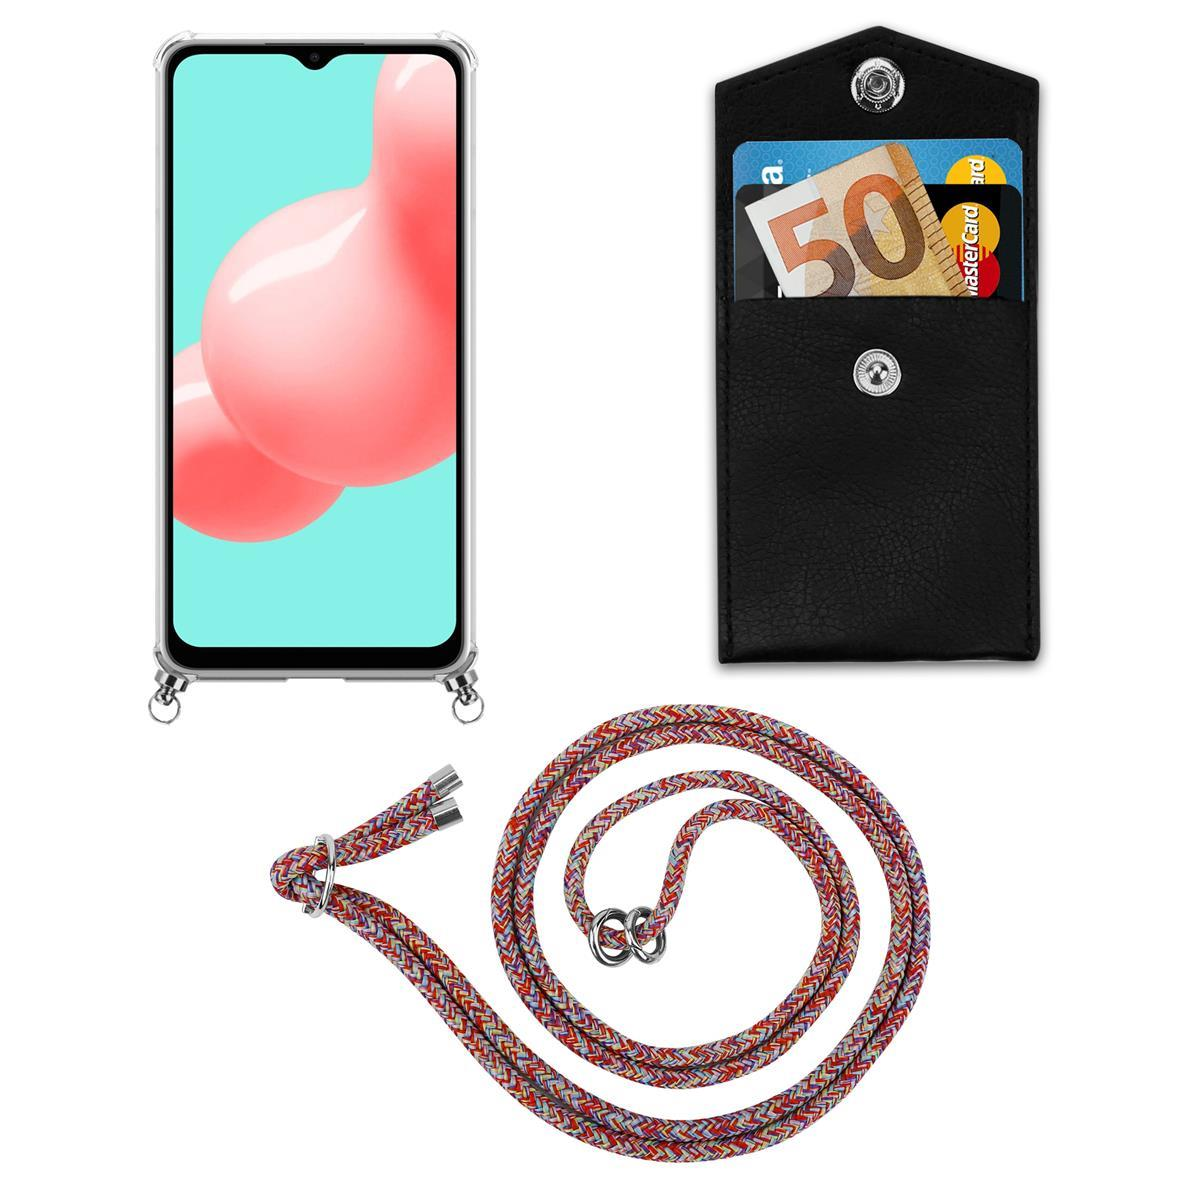 Kette mit Ringen, Kordel CADORABO COLORFUL 5G, Samsung, und A32 abnehmbarer Handy Silber Galaxy Band PARROT Backcover, Hülle,